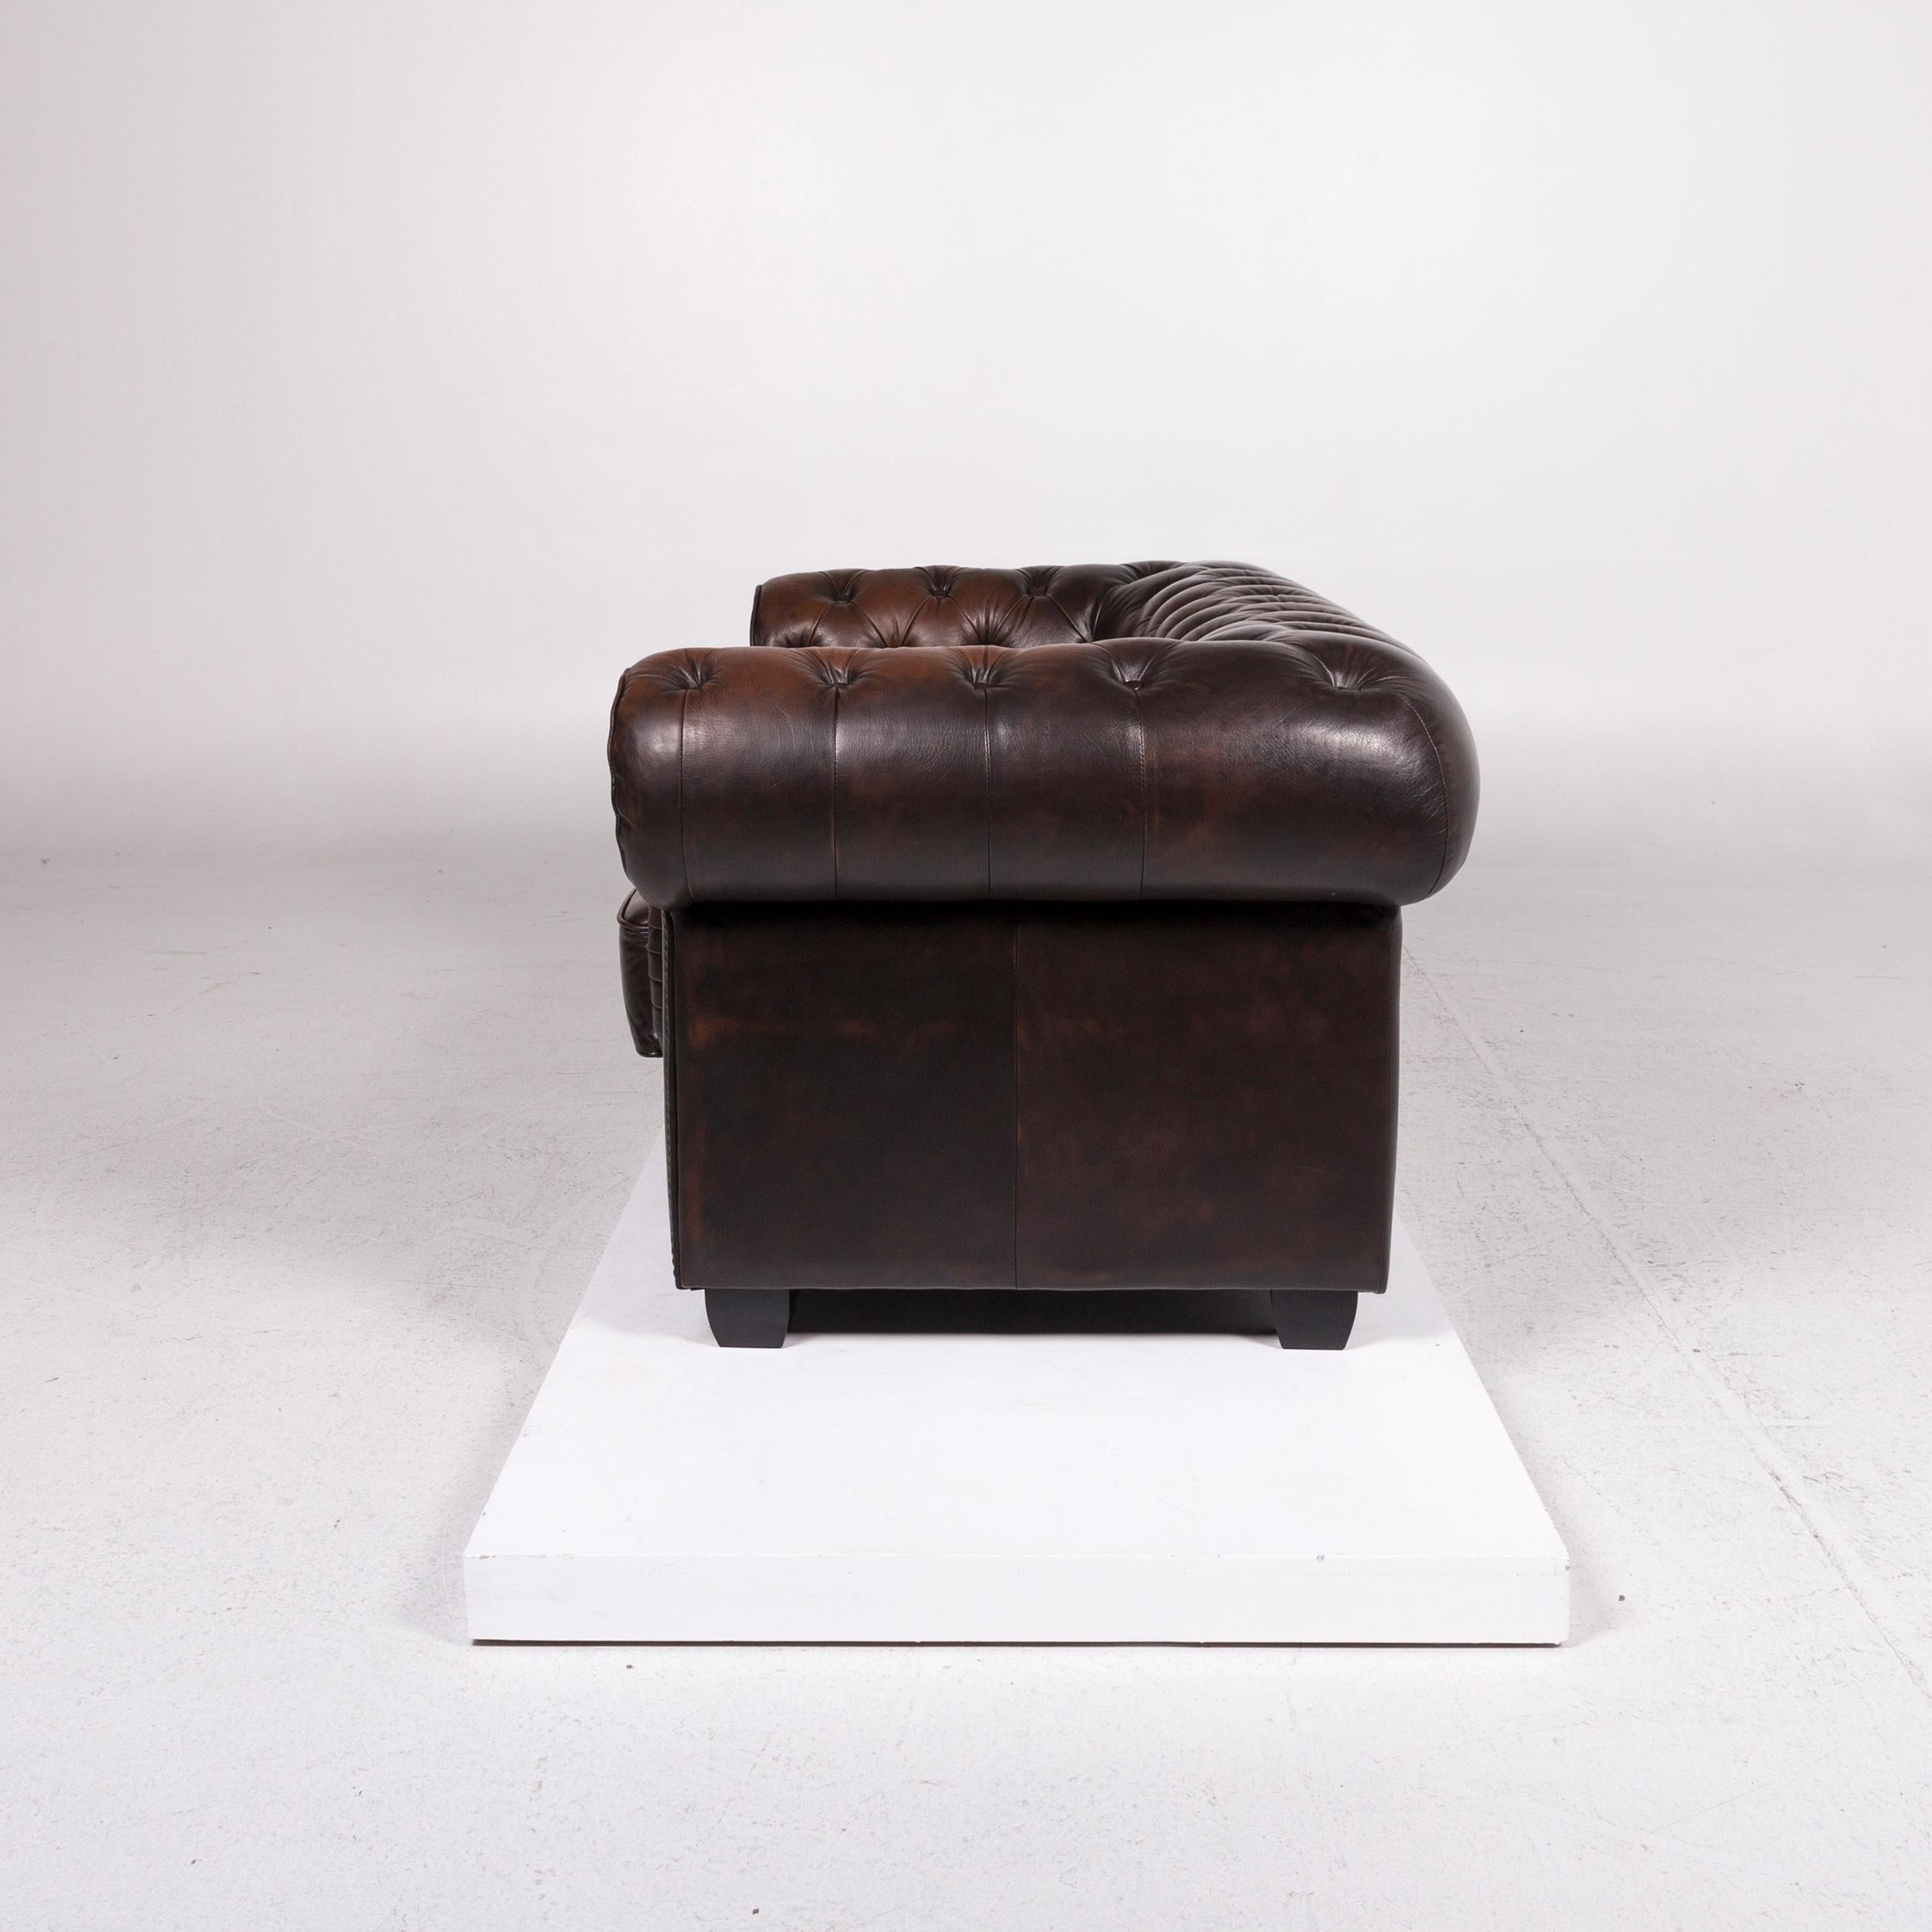 Chesterfield Leather Sofa Brown Dark Brown Two-Seat Retro Couch 4